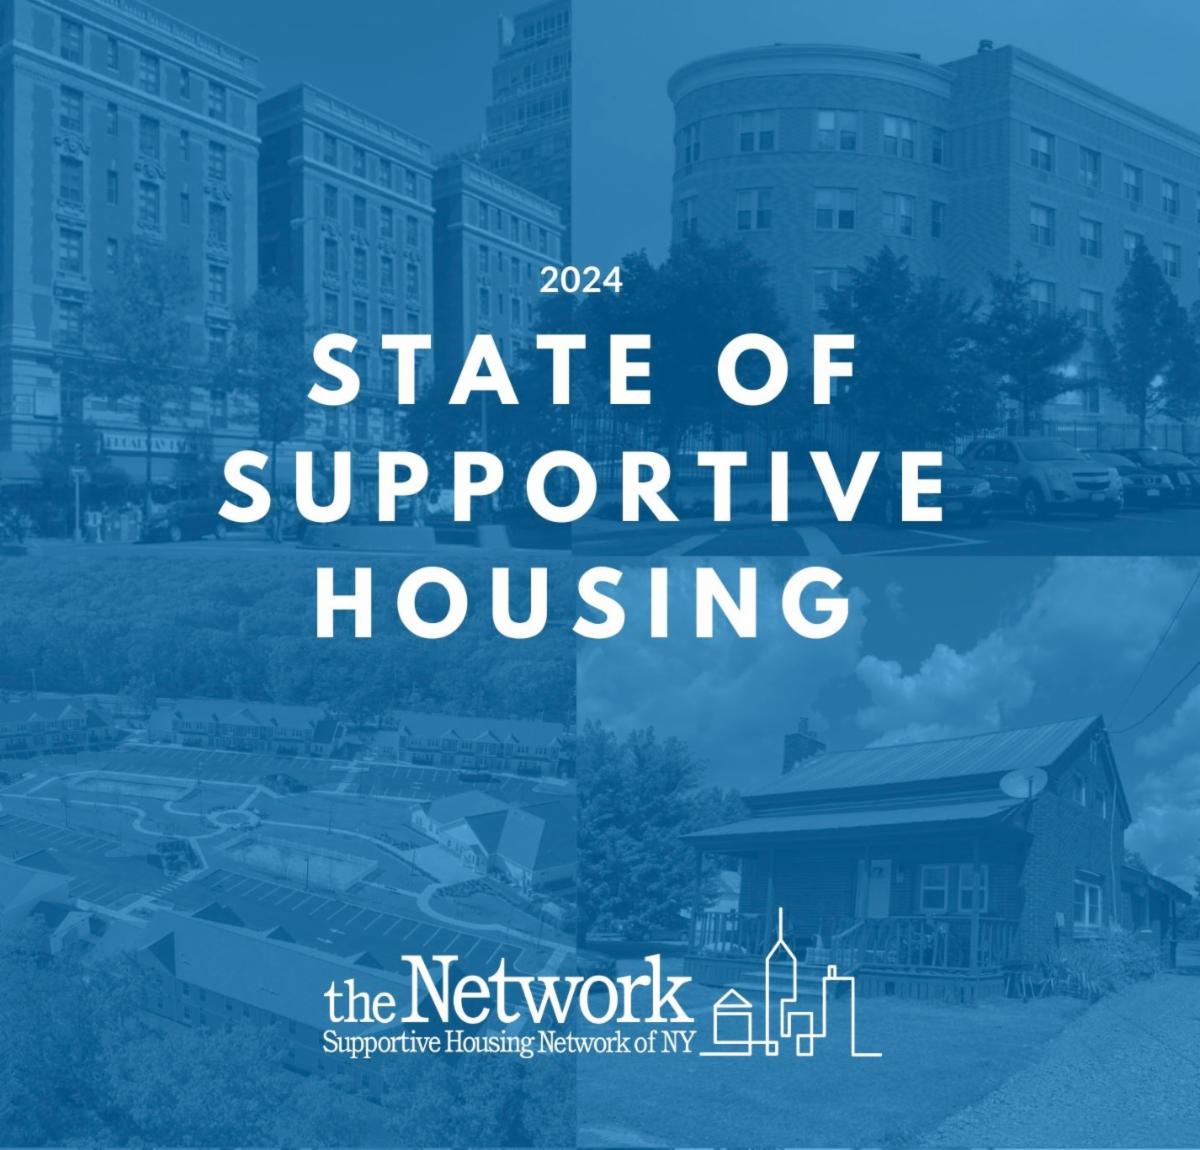 Two #supportivehousing expansion plans—ESSHI & NYC 15/15—are expected to create 35K more units. For a complete catalog of the state of supportive housing today and where it can expand in the future, check out @theNetworkNY's new first-of-its-kind report: storymaps.arcgis.com/stories/d51aa5…